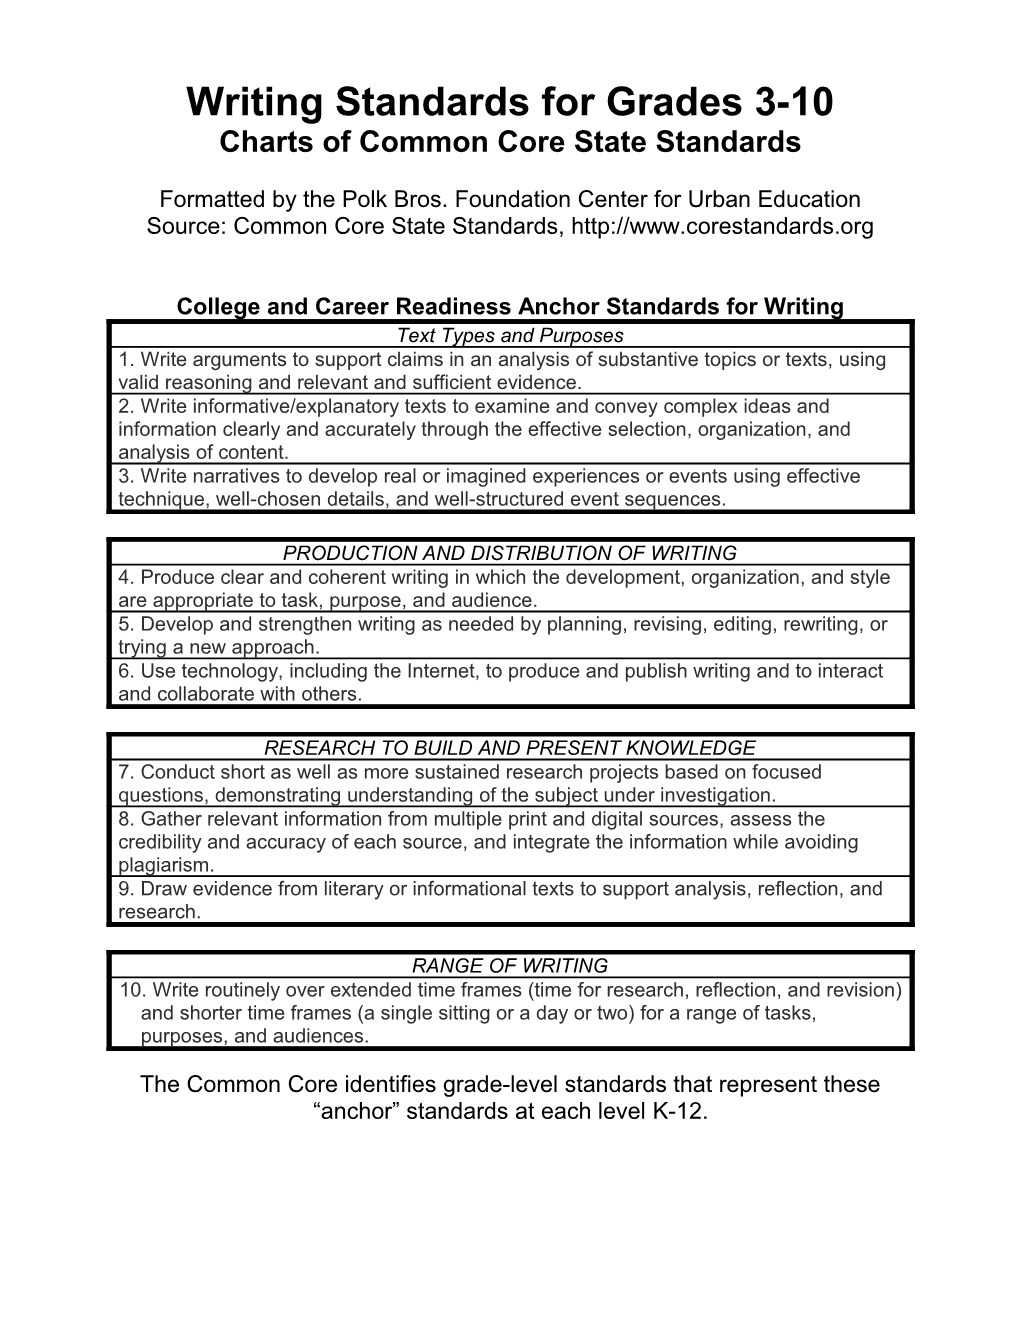 Writing Standards for Grades 3-10